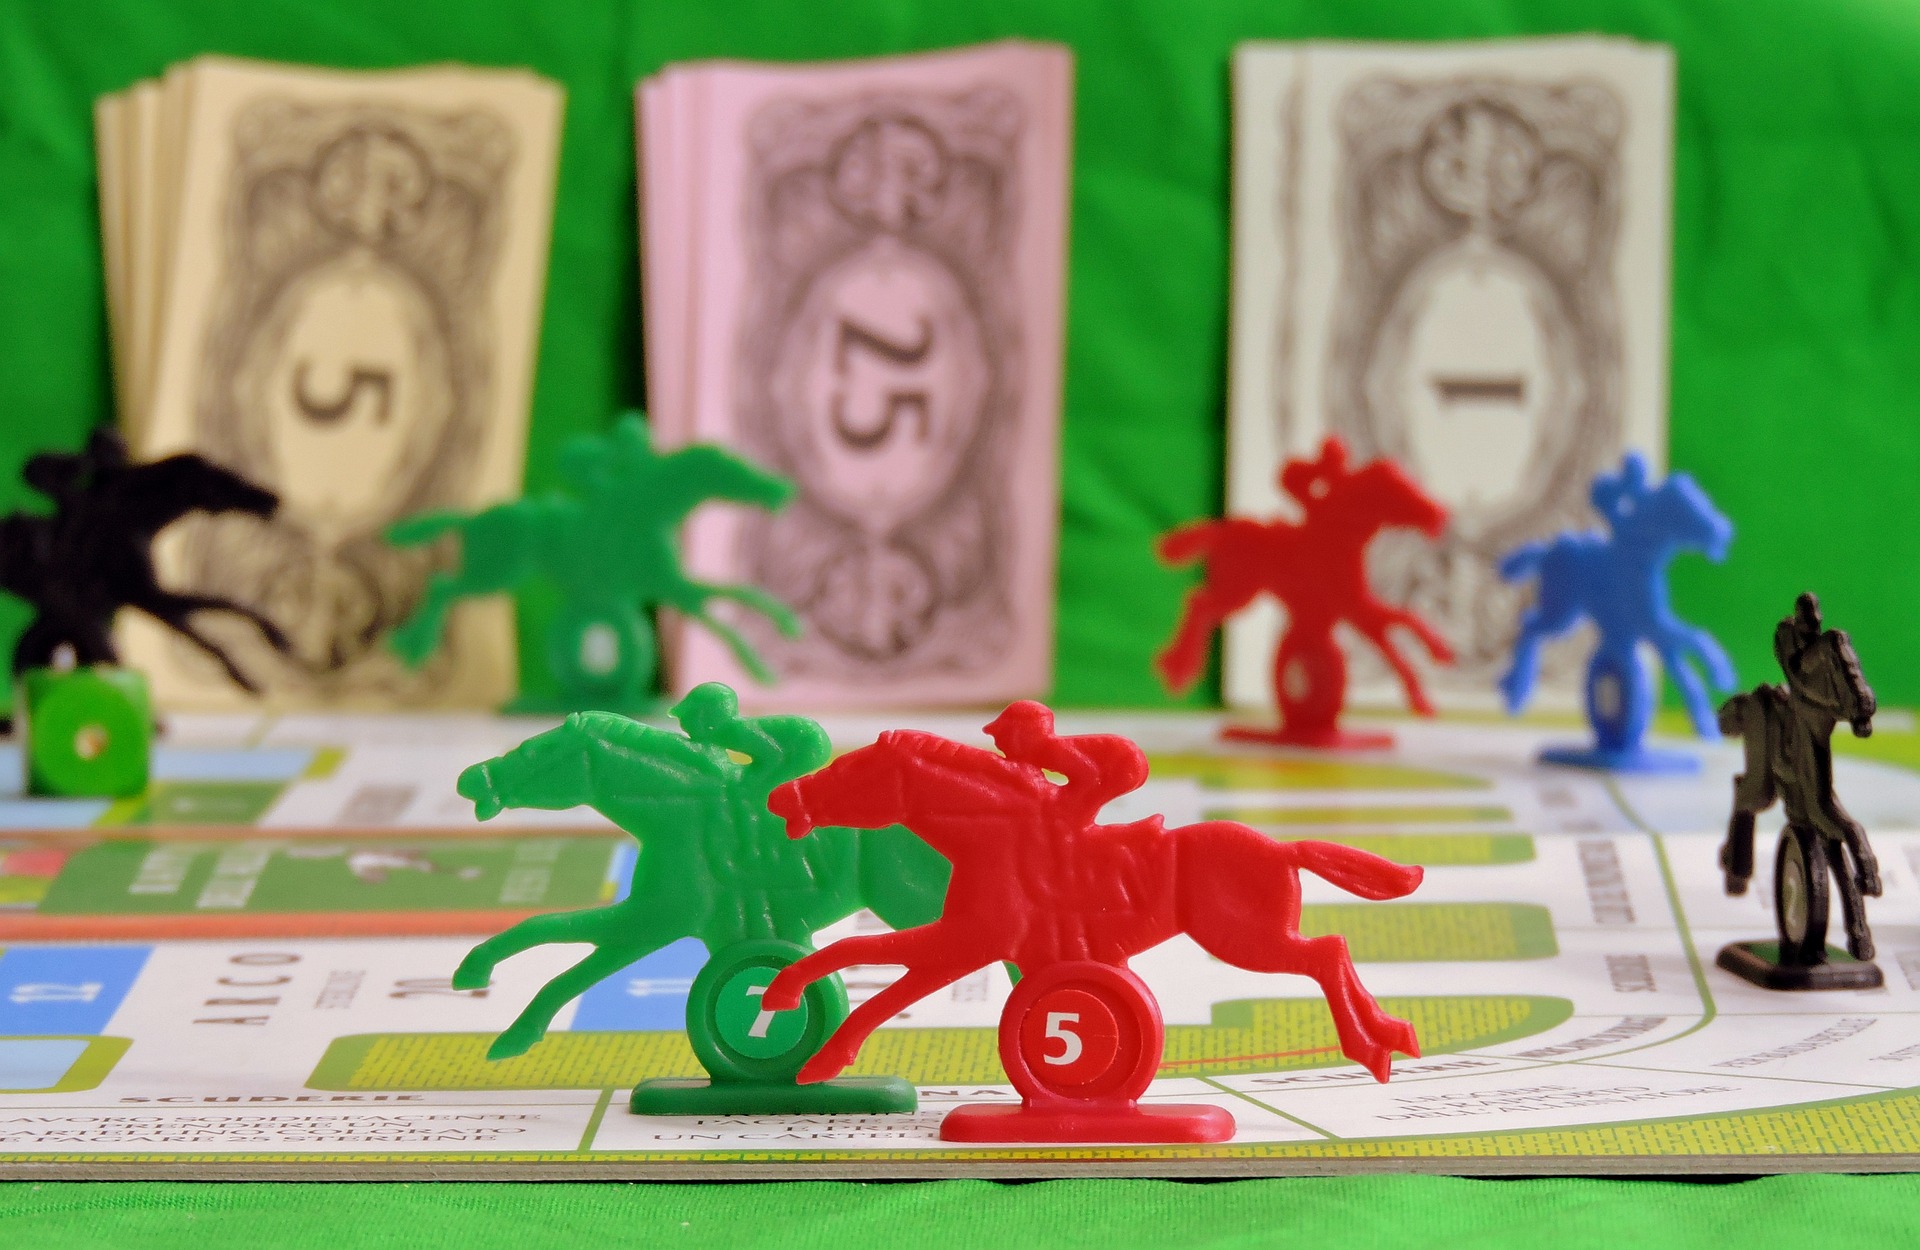 Horse race tabletop game